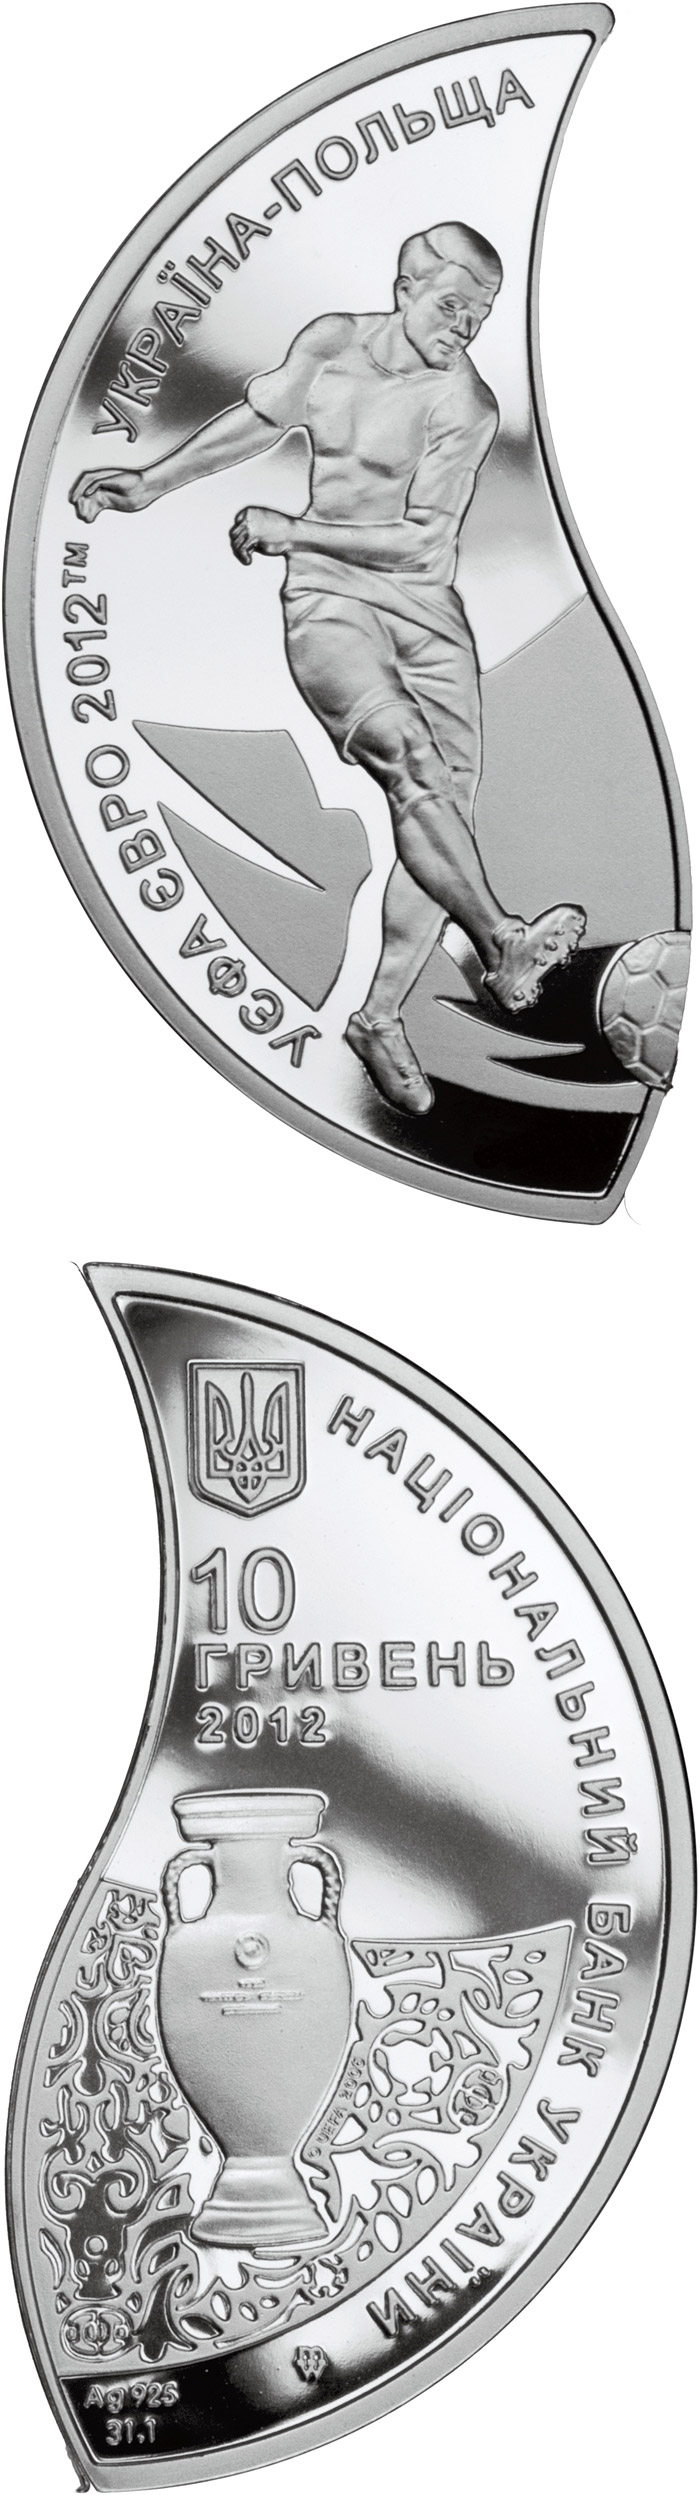 Image of 10 hryvnia  coin - UEFA EURO 2012 | Ukraine 2012.  The Silver coin is of Proof quality.